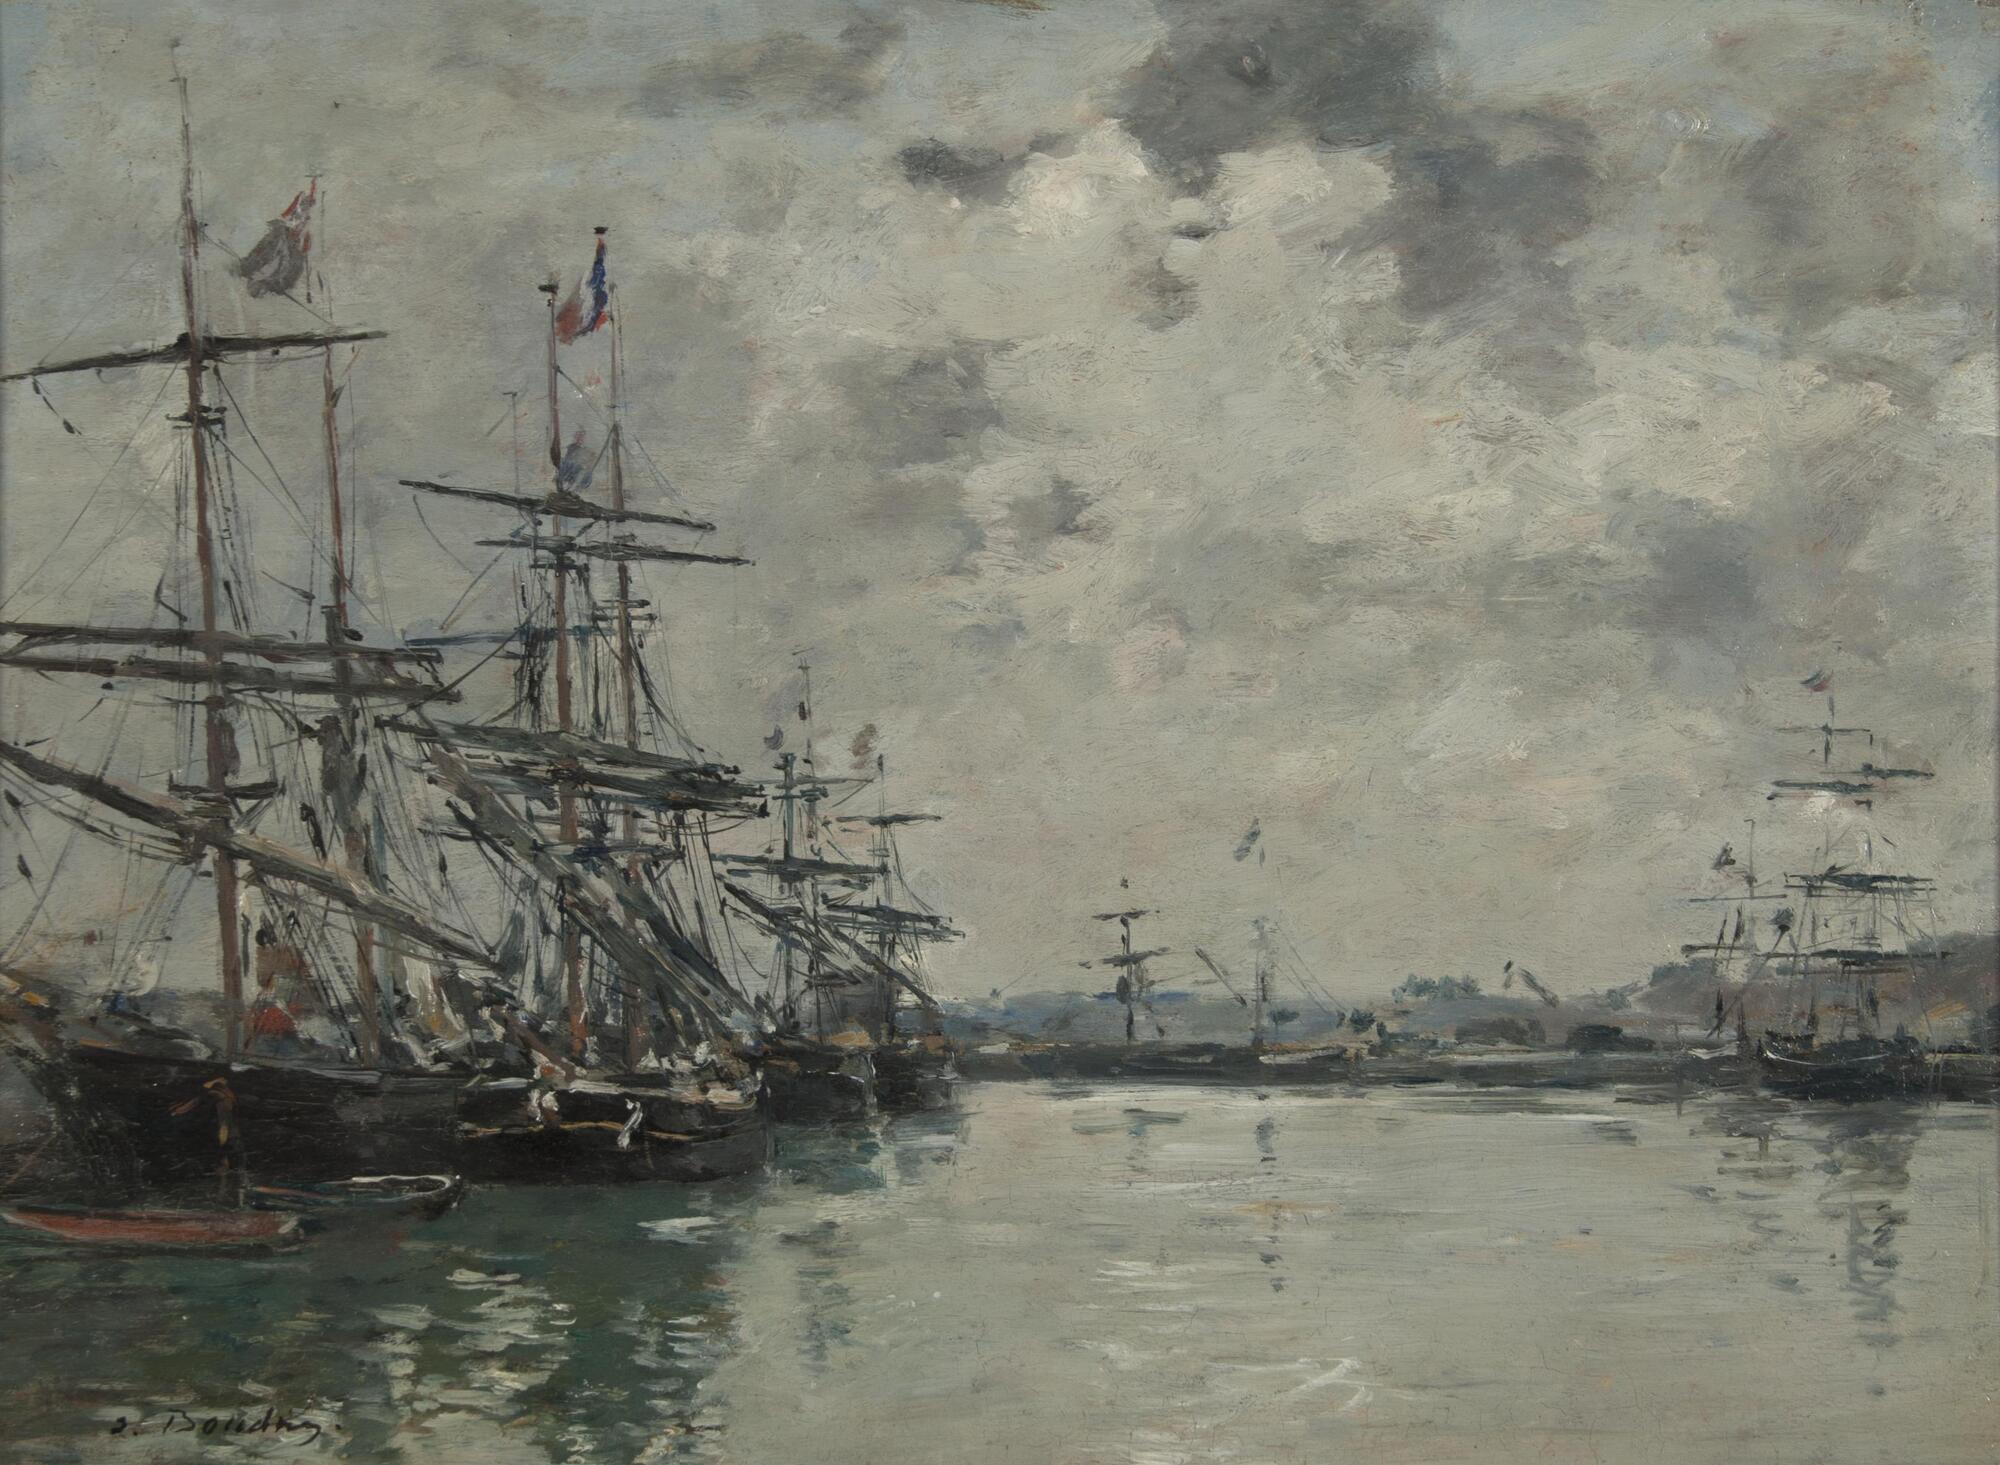 Boats are docked at a seaport under an expanse of cloudy, overcast sky. The horizon line is low, and all the vessels are sailboats, with the exception of one dingy on the left hand side. The color palette is dominated by greys, blues, blacks, browns and whites.